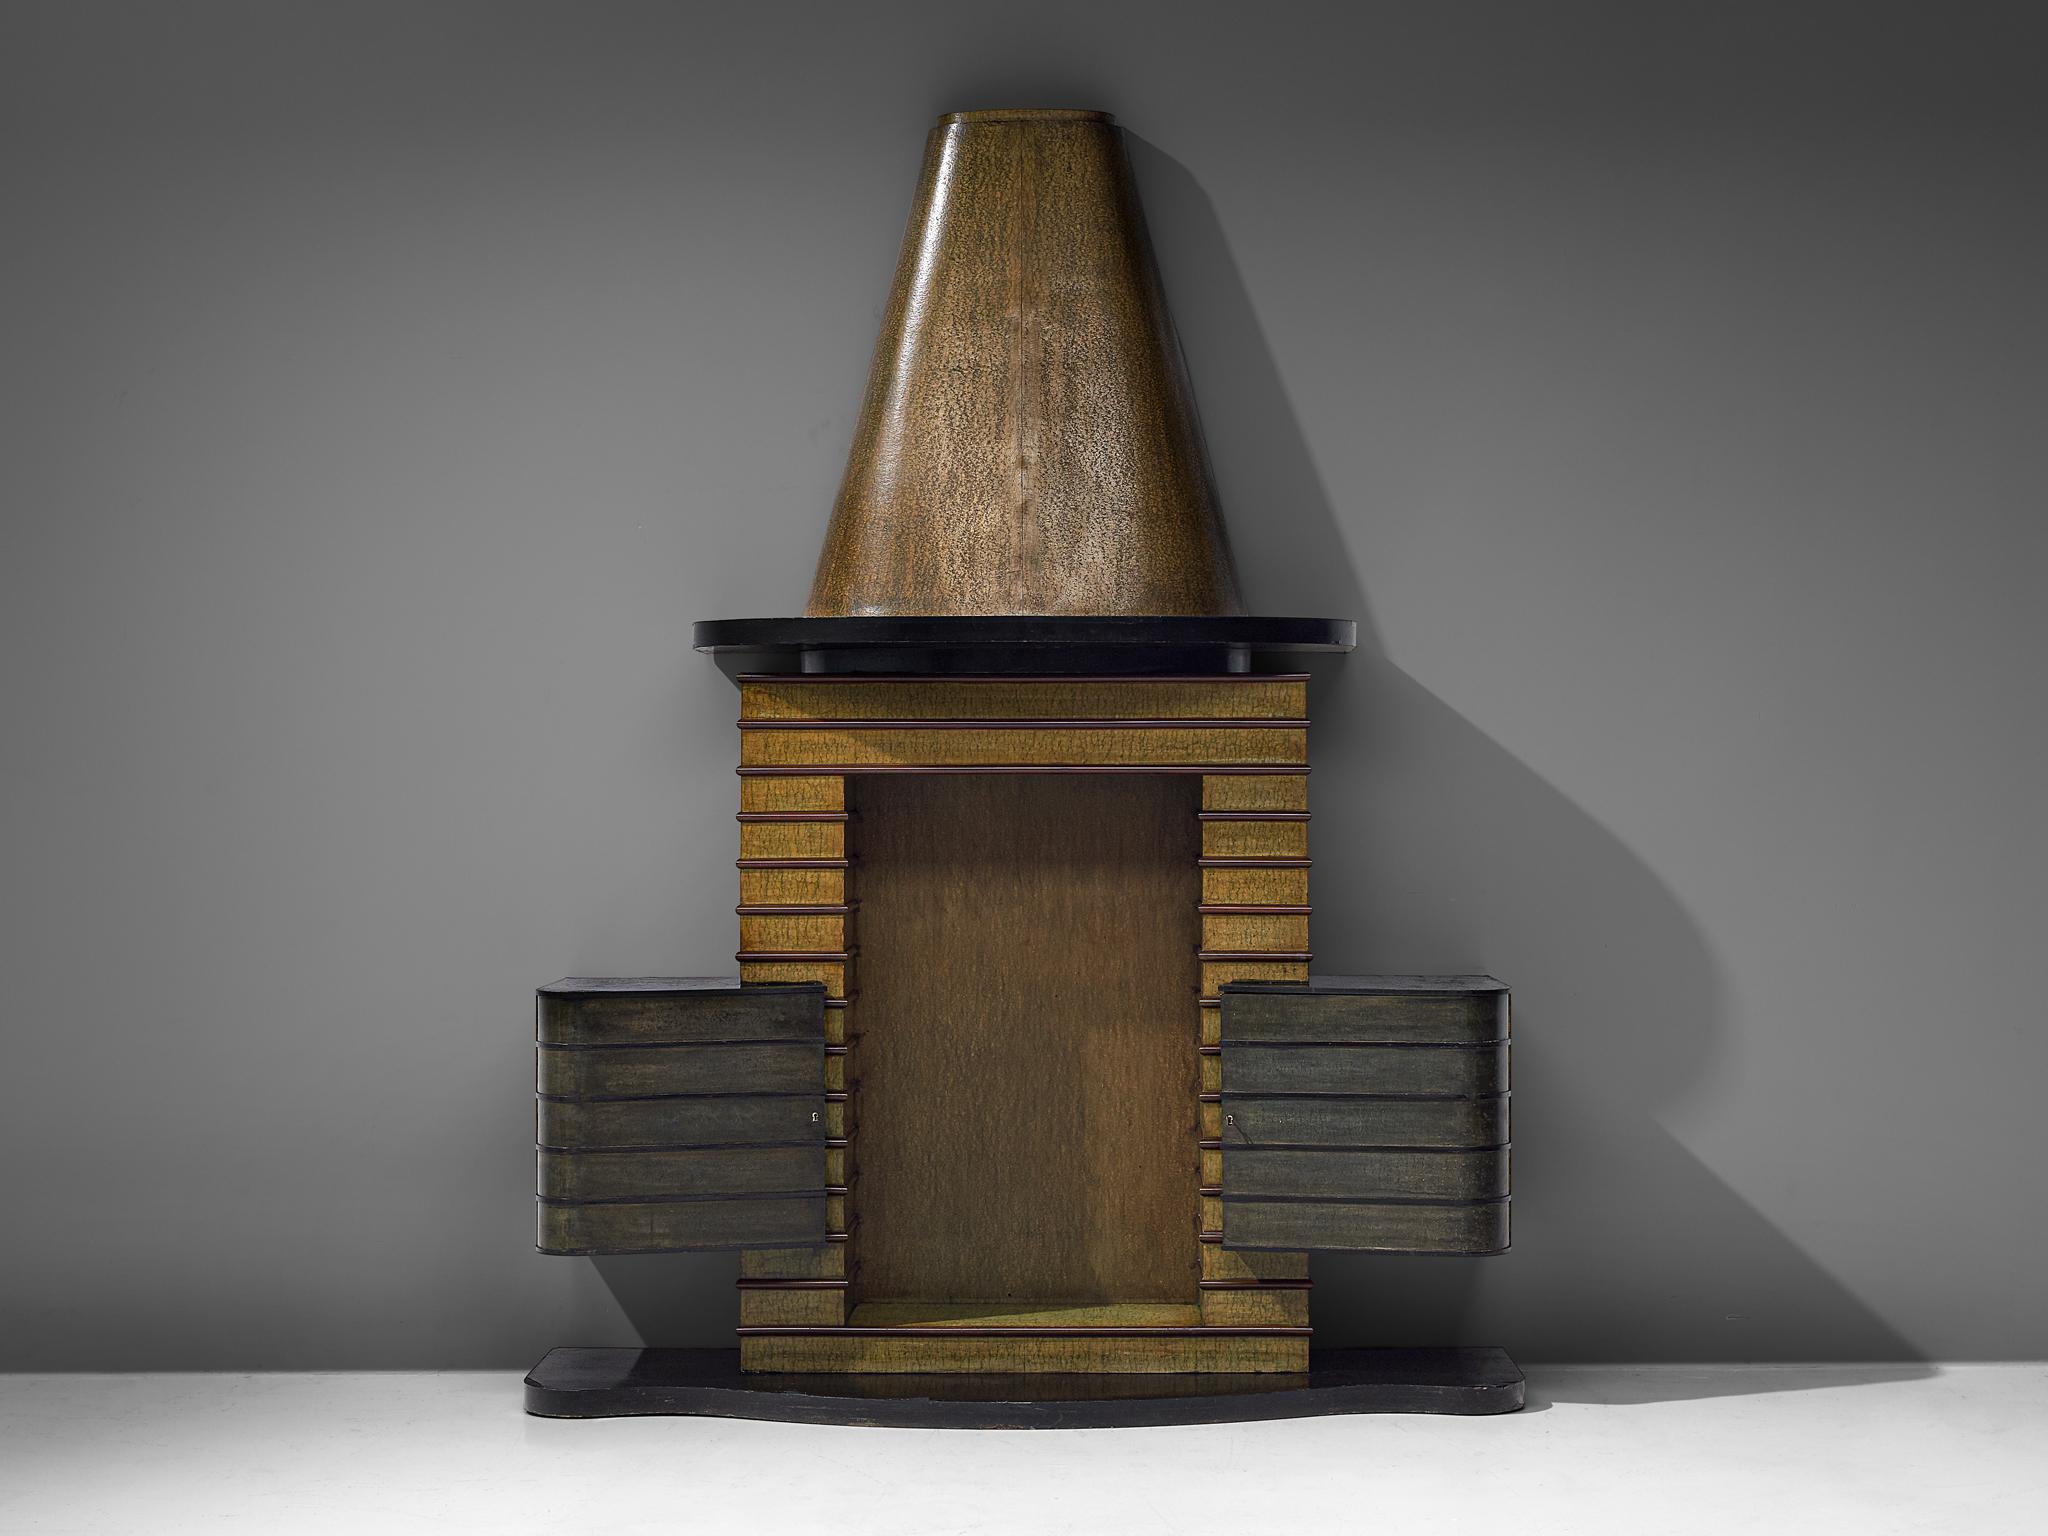 Vittorio Valabrega, bar cabinet, beech, laminated wood, Italy, 1930s

A bar cabinet by the Italian artist and designer Vittorio Valabrega from the 1930s. The cabinet features an organic shaped base in black lacquer. The storage area consists of